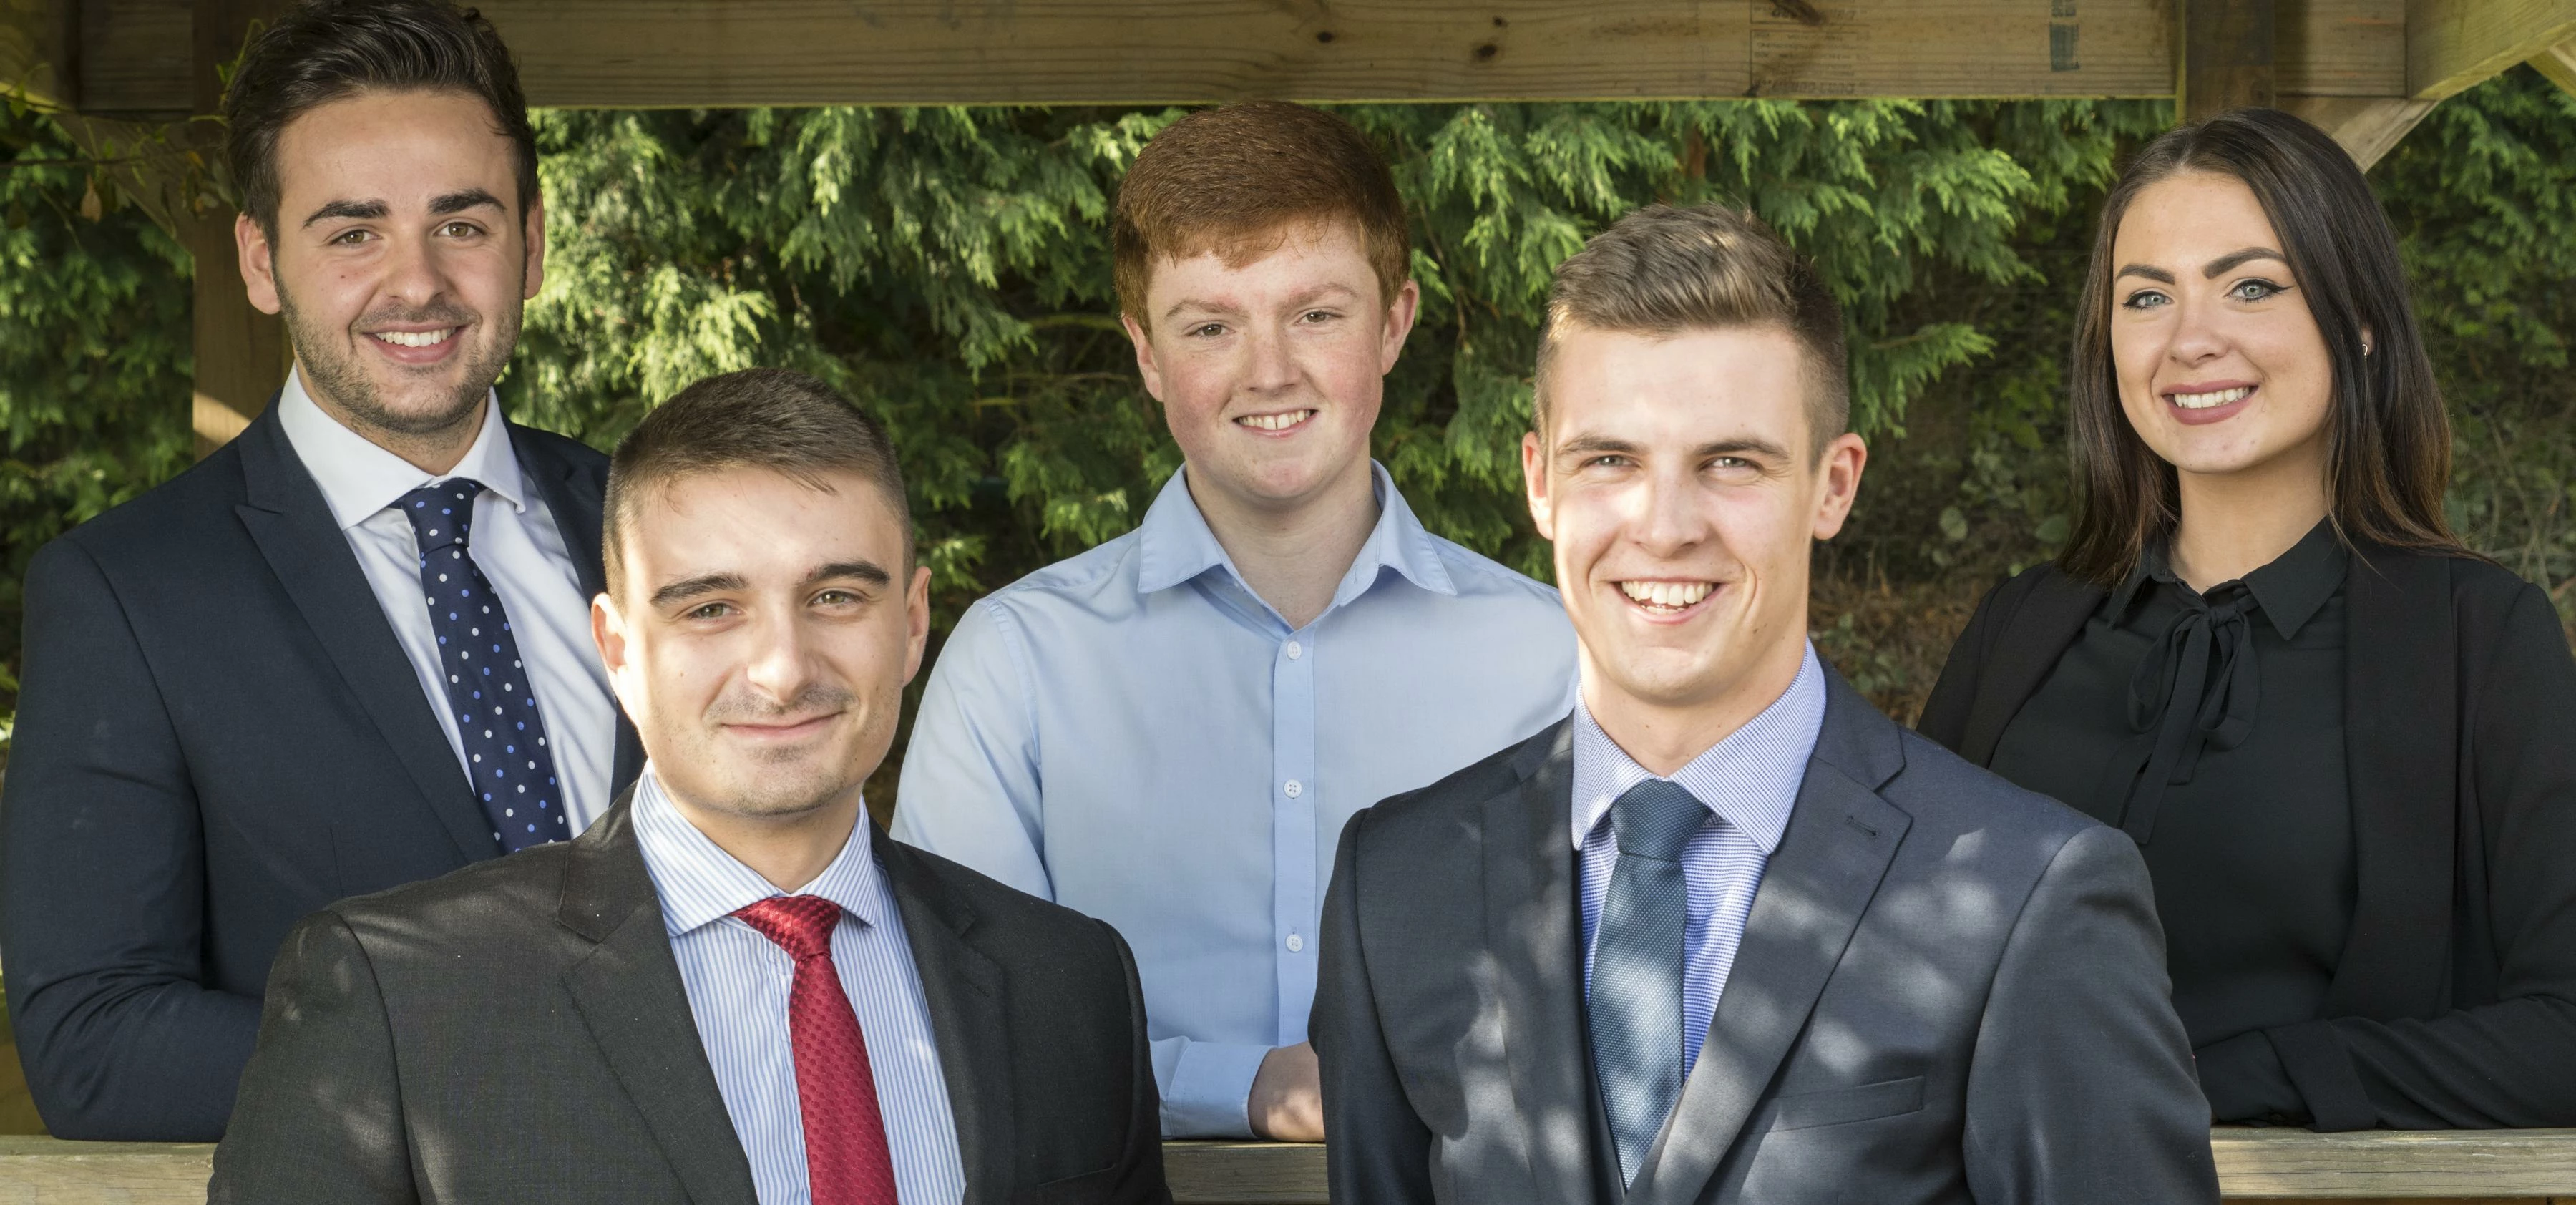 They're hired - Five fresh faces join Cassons’ team